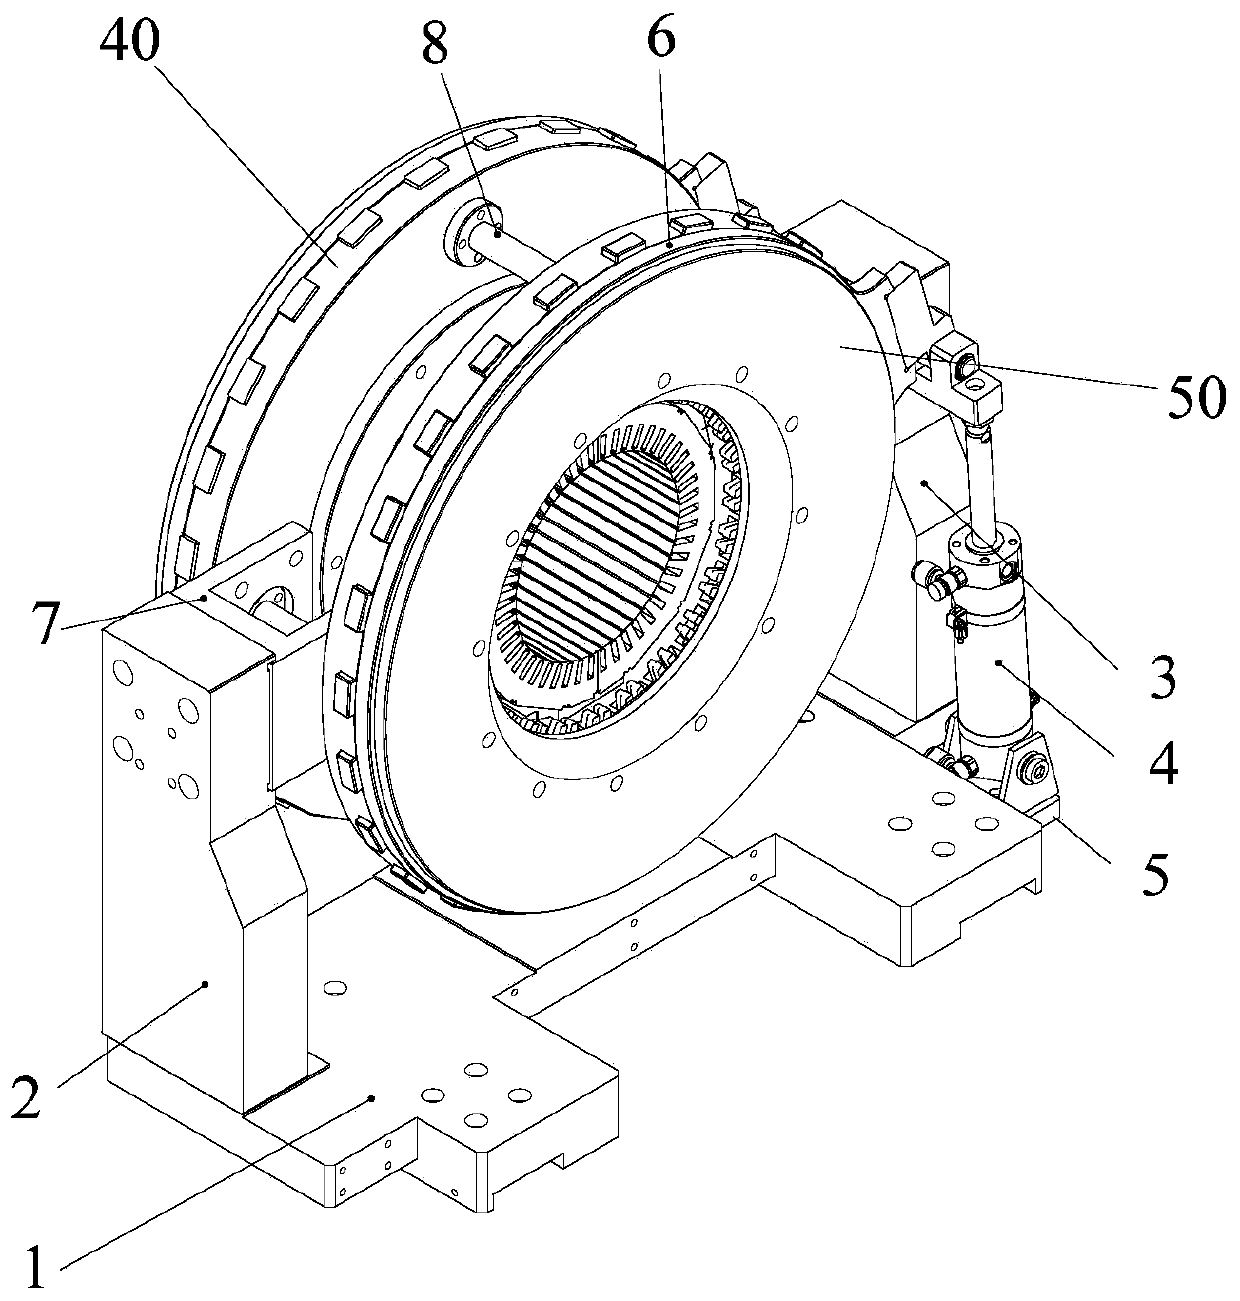 Positioning and guiding device for inserting flat wire hairpin into stator